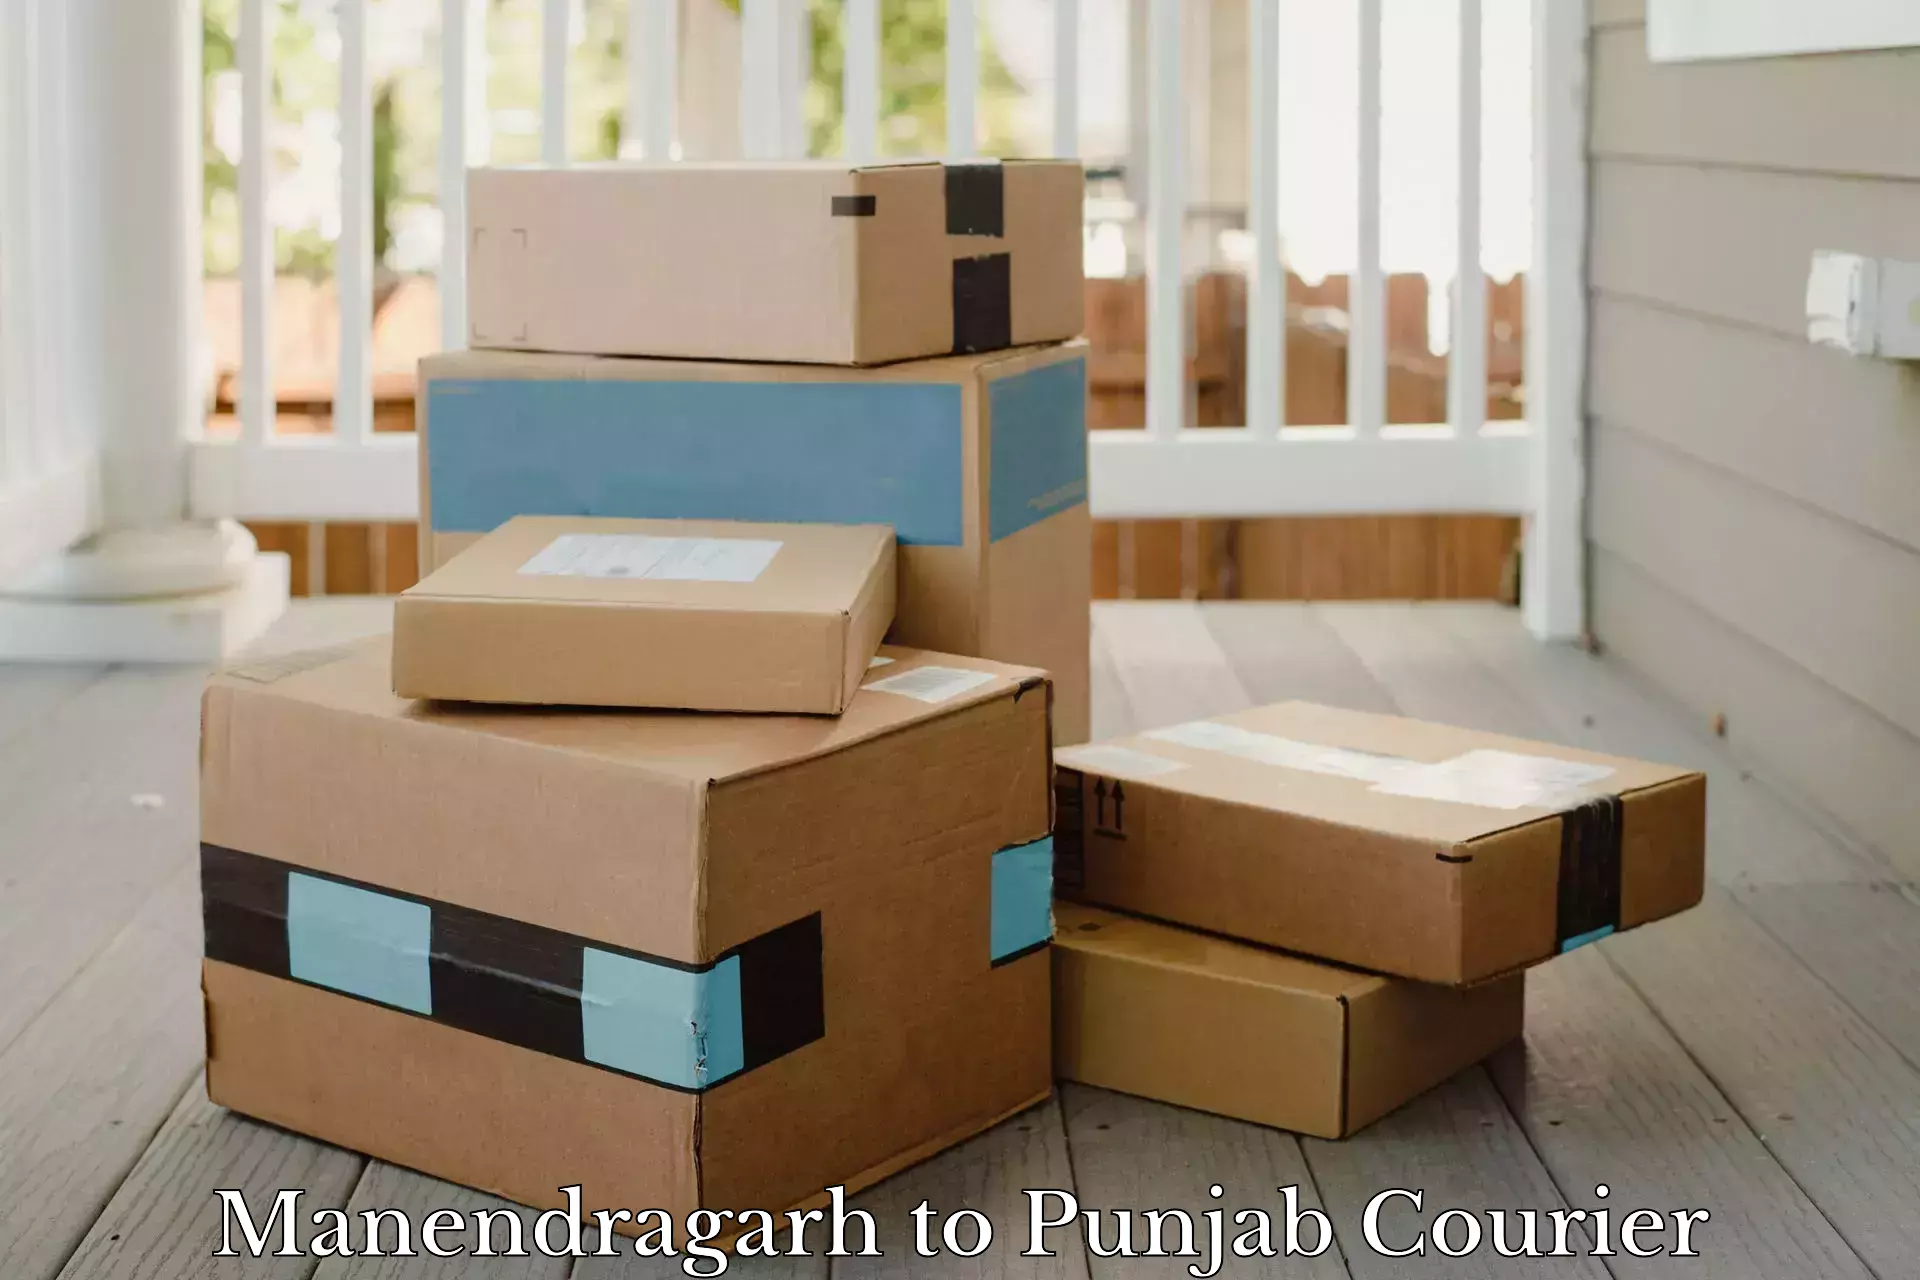 State-of-the-art courier technology Manendragarh to Zira